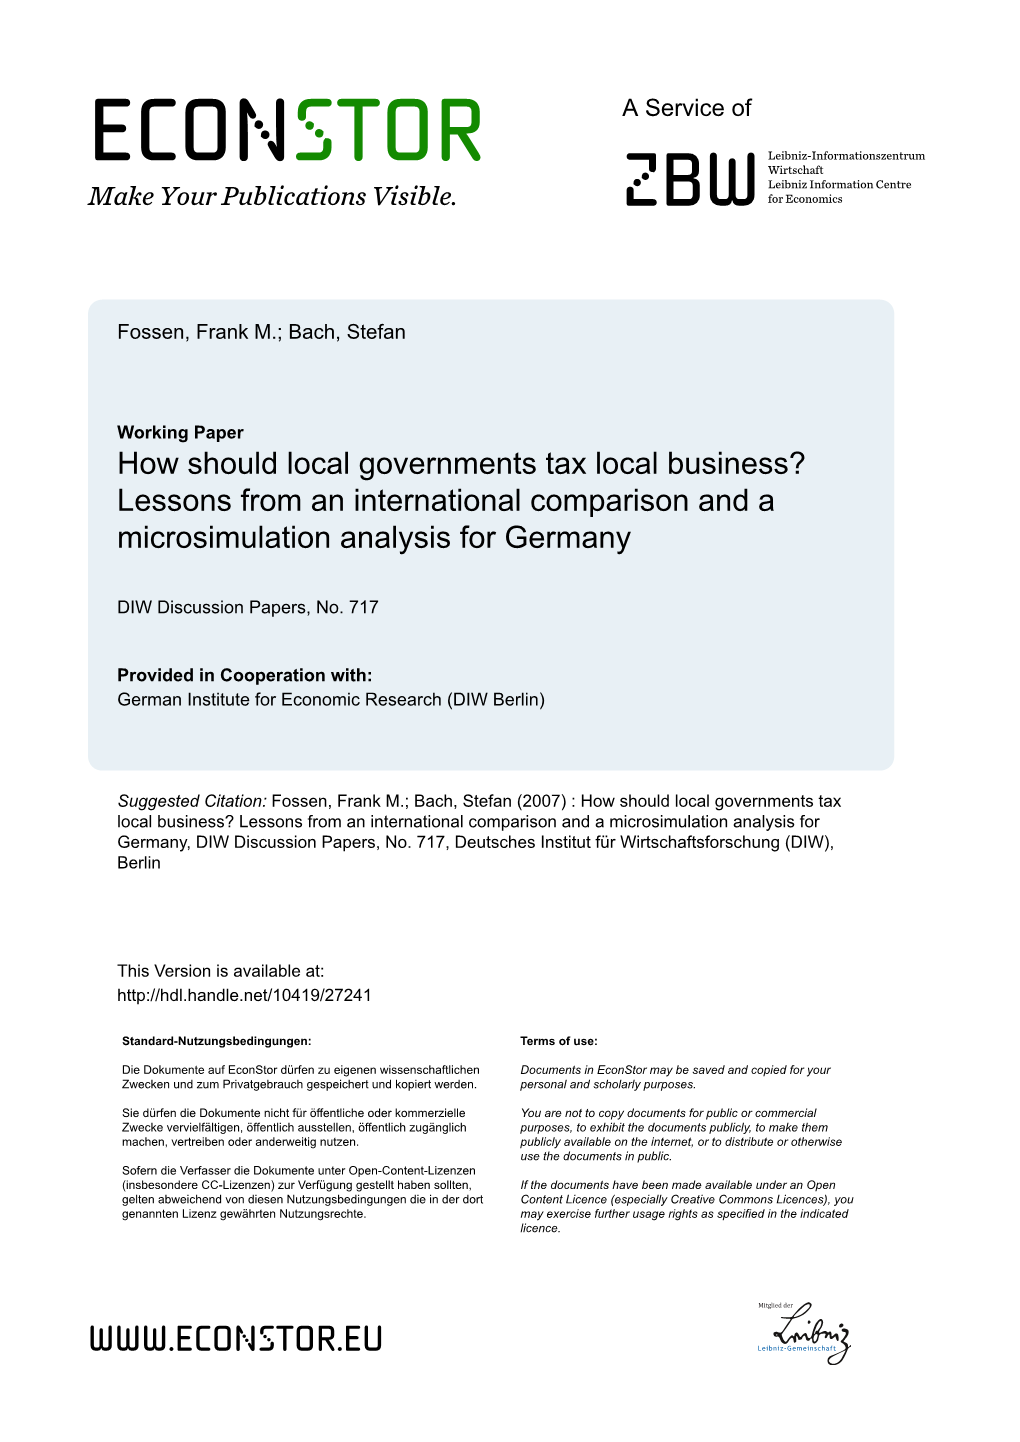 How Should Local Governments Tax Local Business? Lessons from an International Comparison and a Microsimulation Analysis for Germany